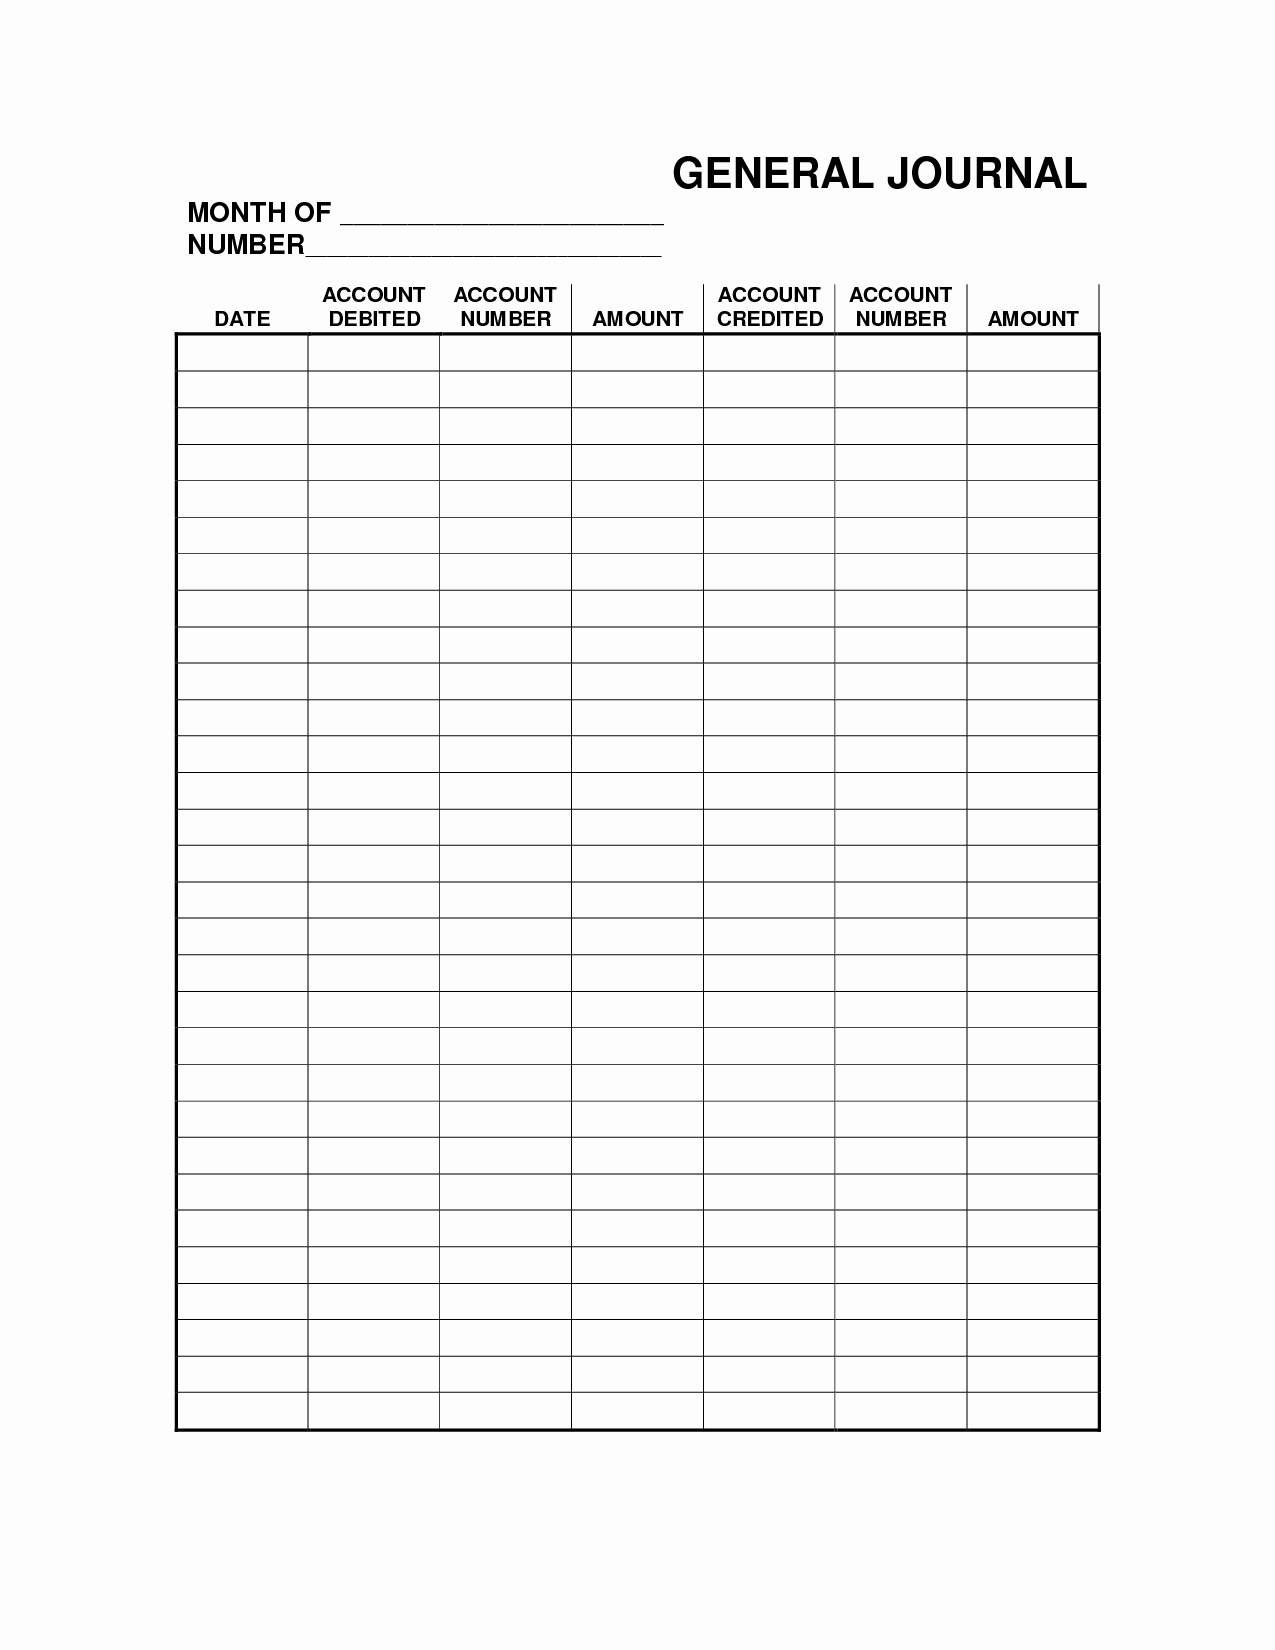 General Journal Template Excel Fresh Best S Of Free Printable Fice forms Templates